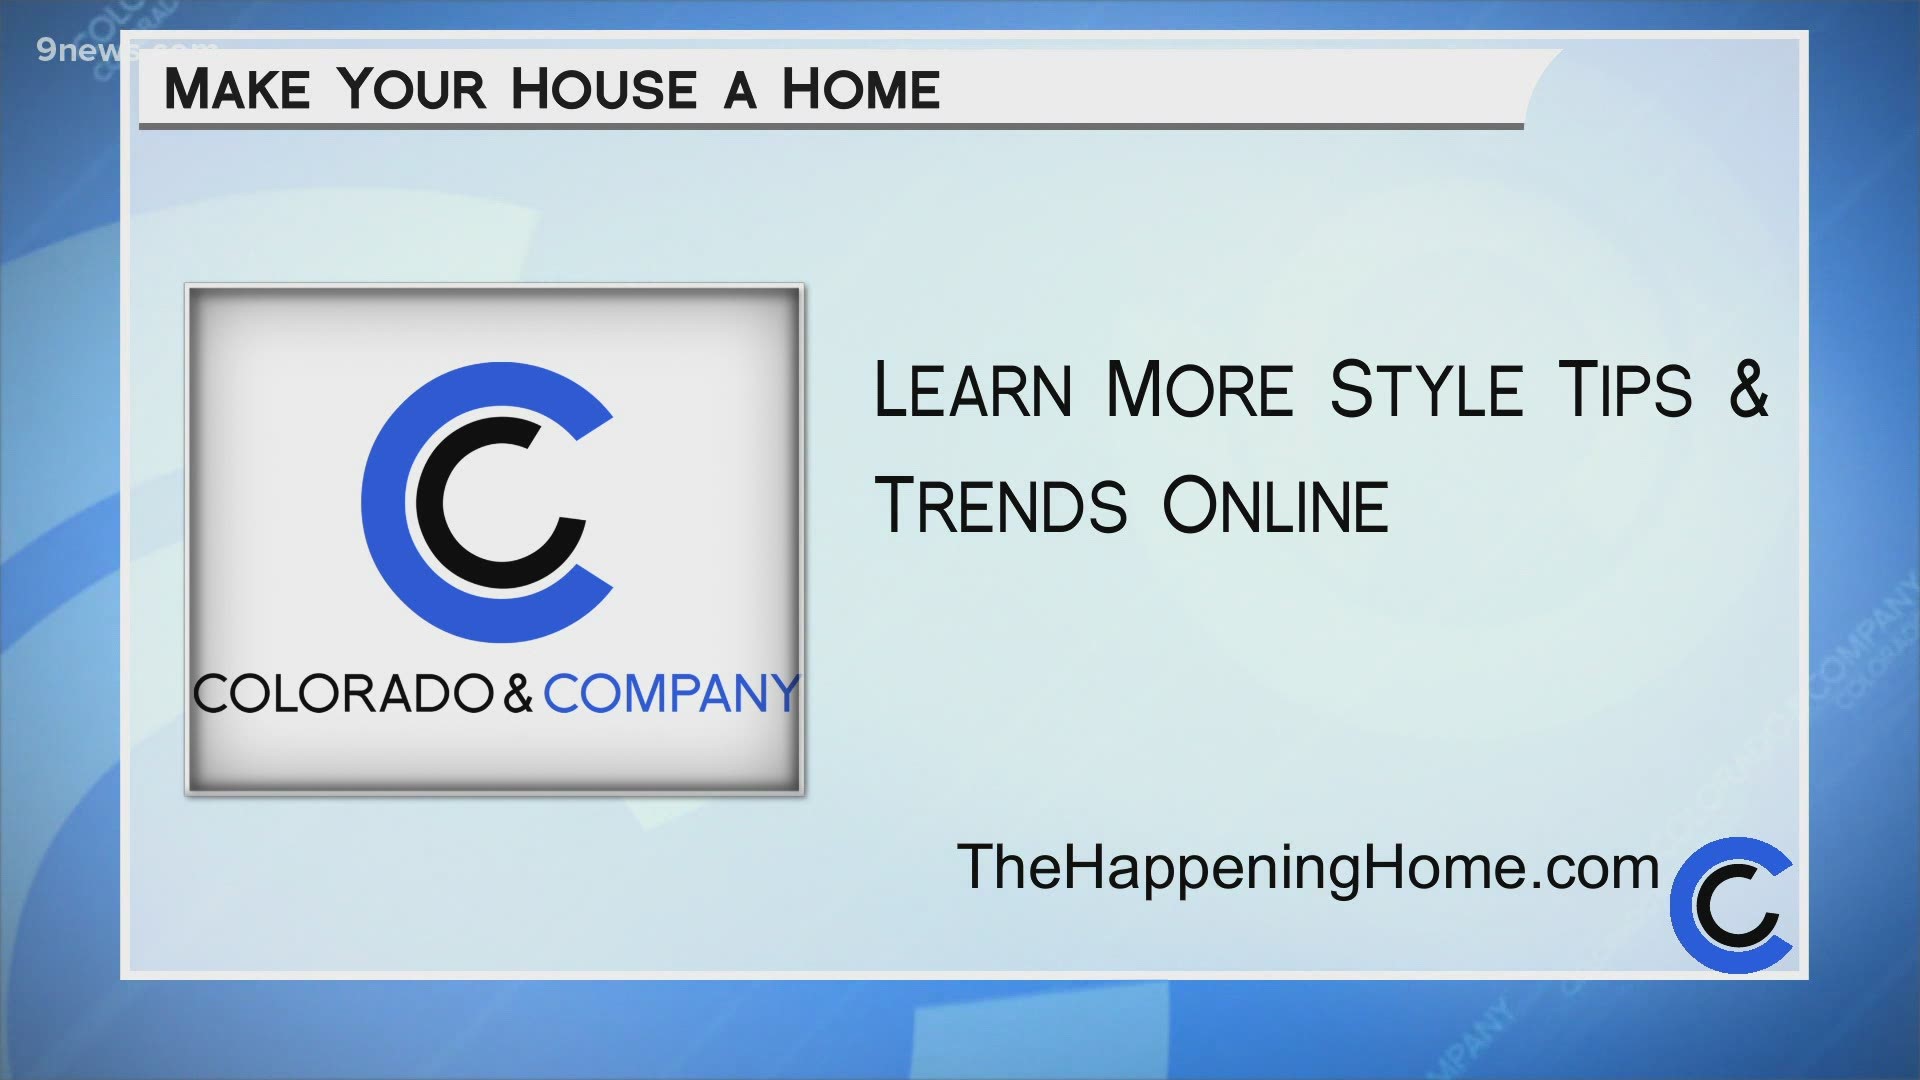 Wendy Crist with The Happening Home has more projects and tips online at TheHappeningHome.com.